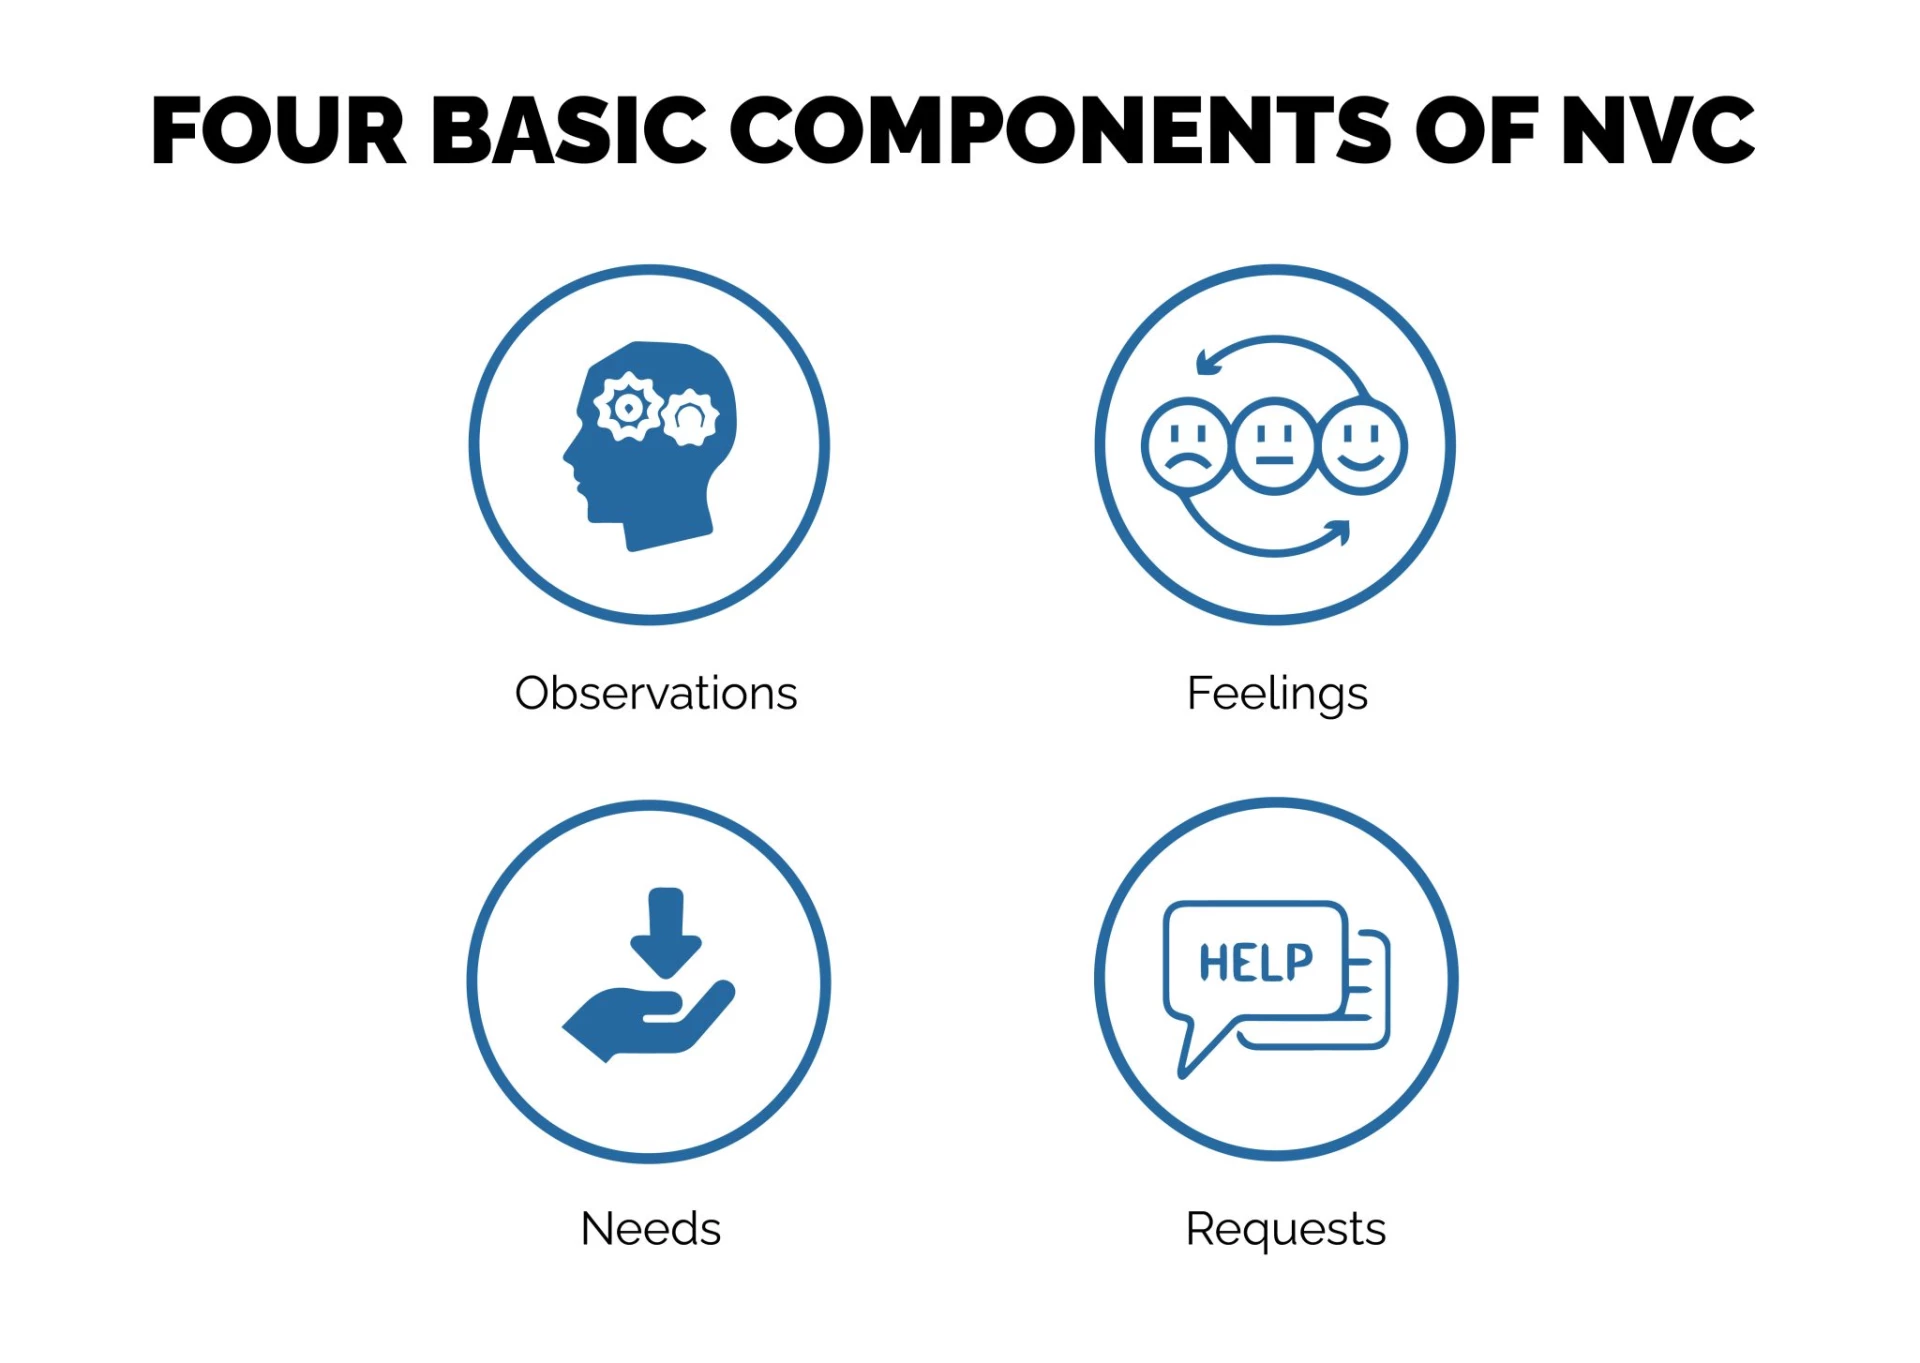 FOUR BASIC COMPONENTS OF NVC